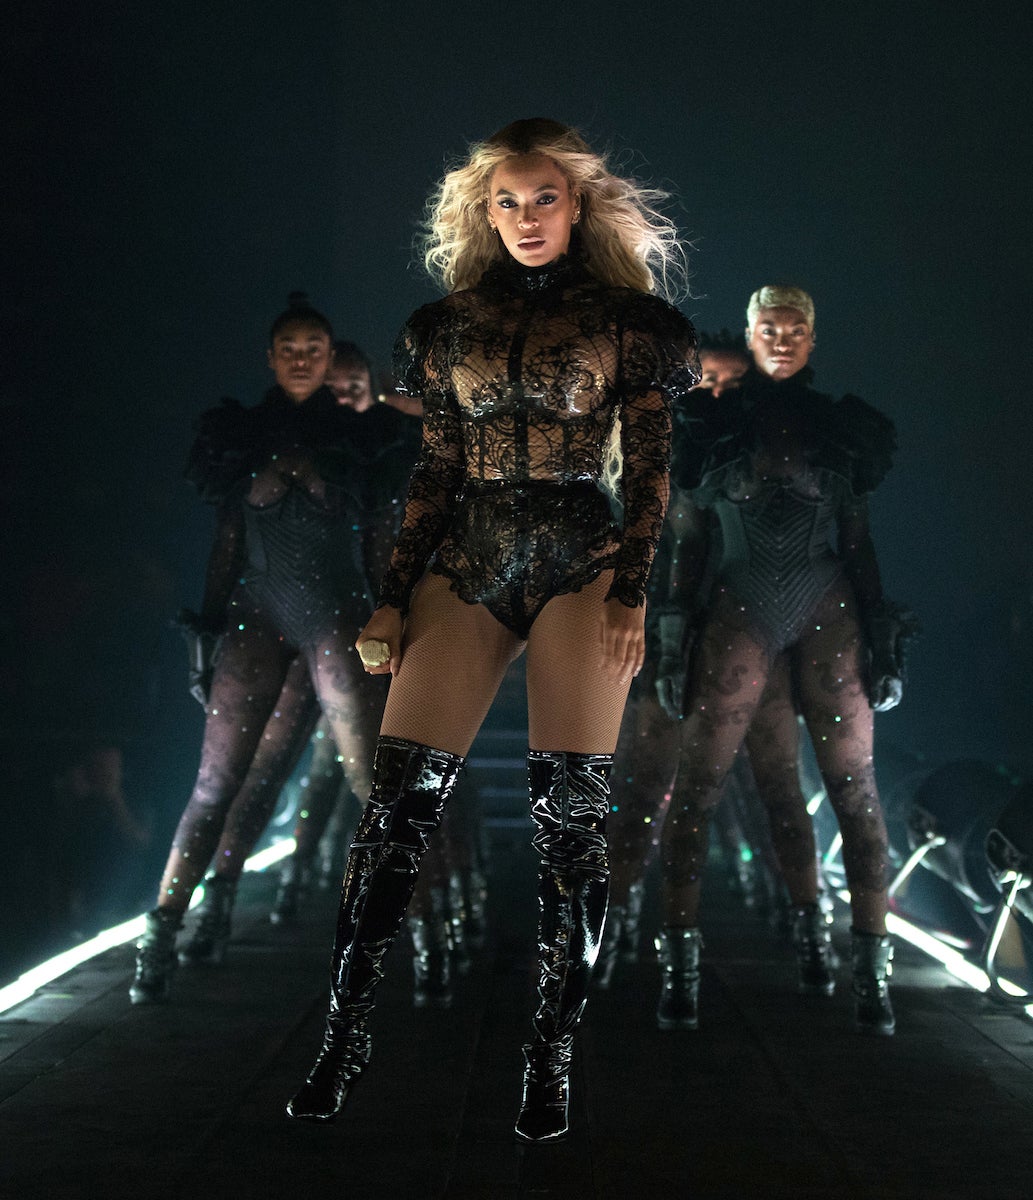 Beyonce Rakes In Over $250 Million From The 'Formation' Tour
